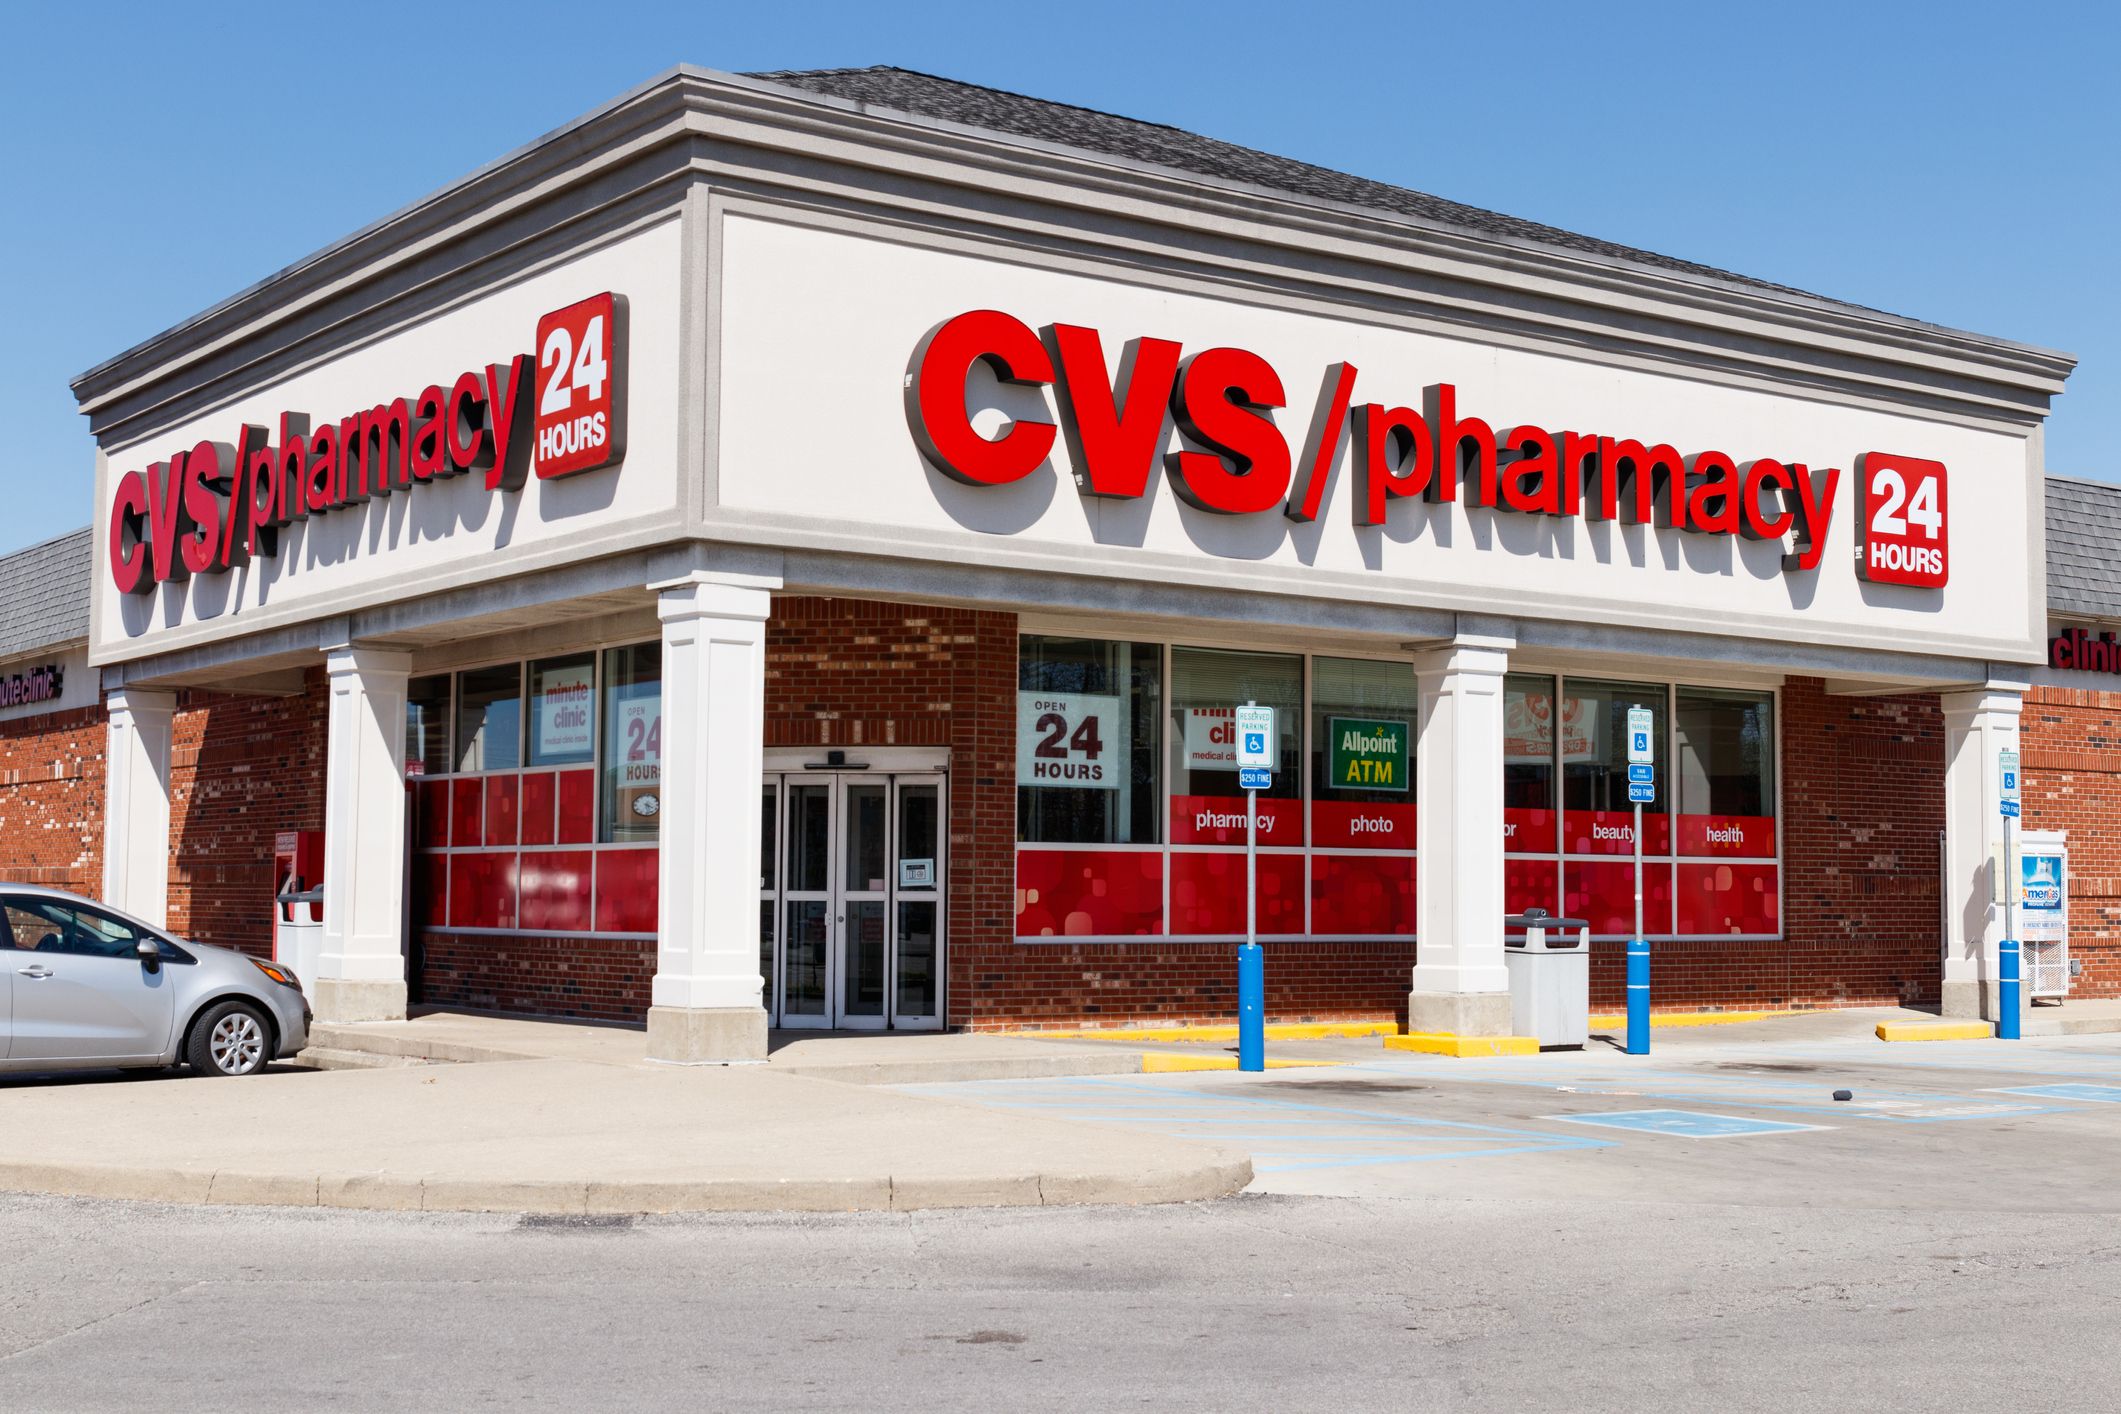 CVS is the 10th most valuable retail outlets in the world